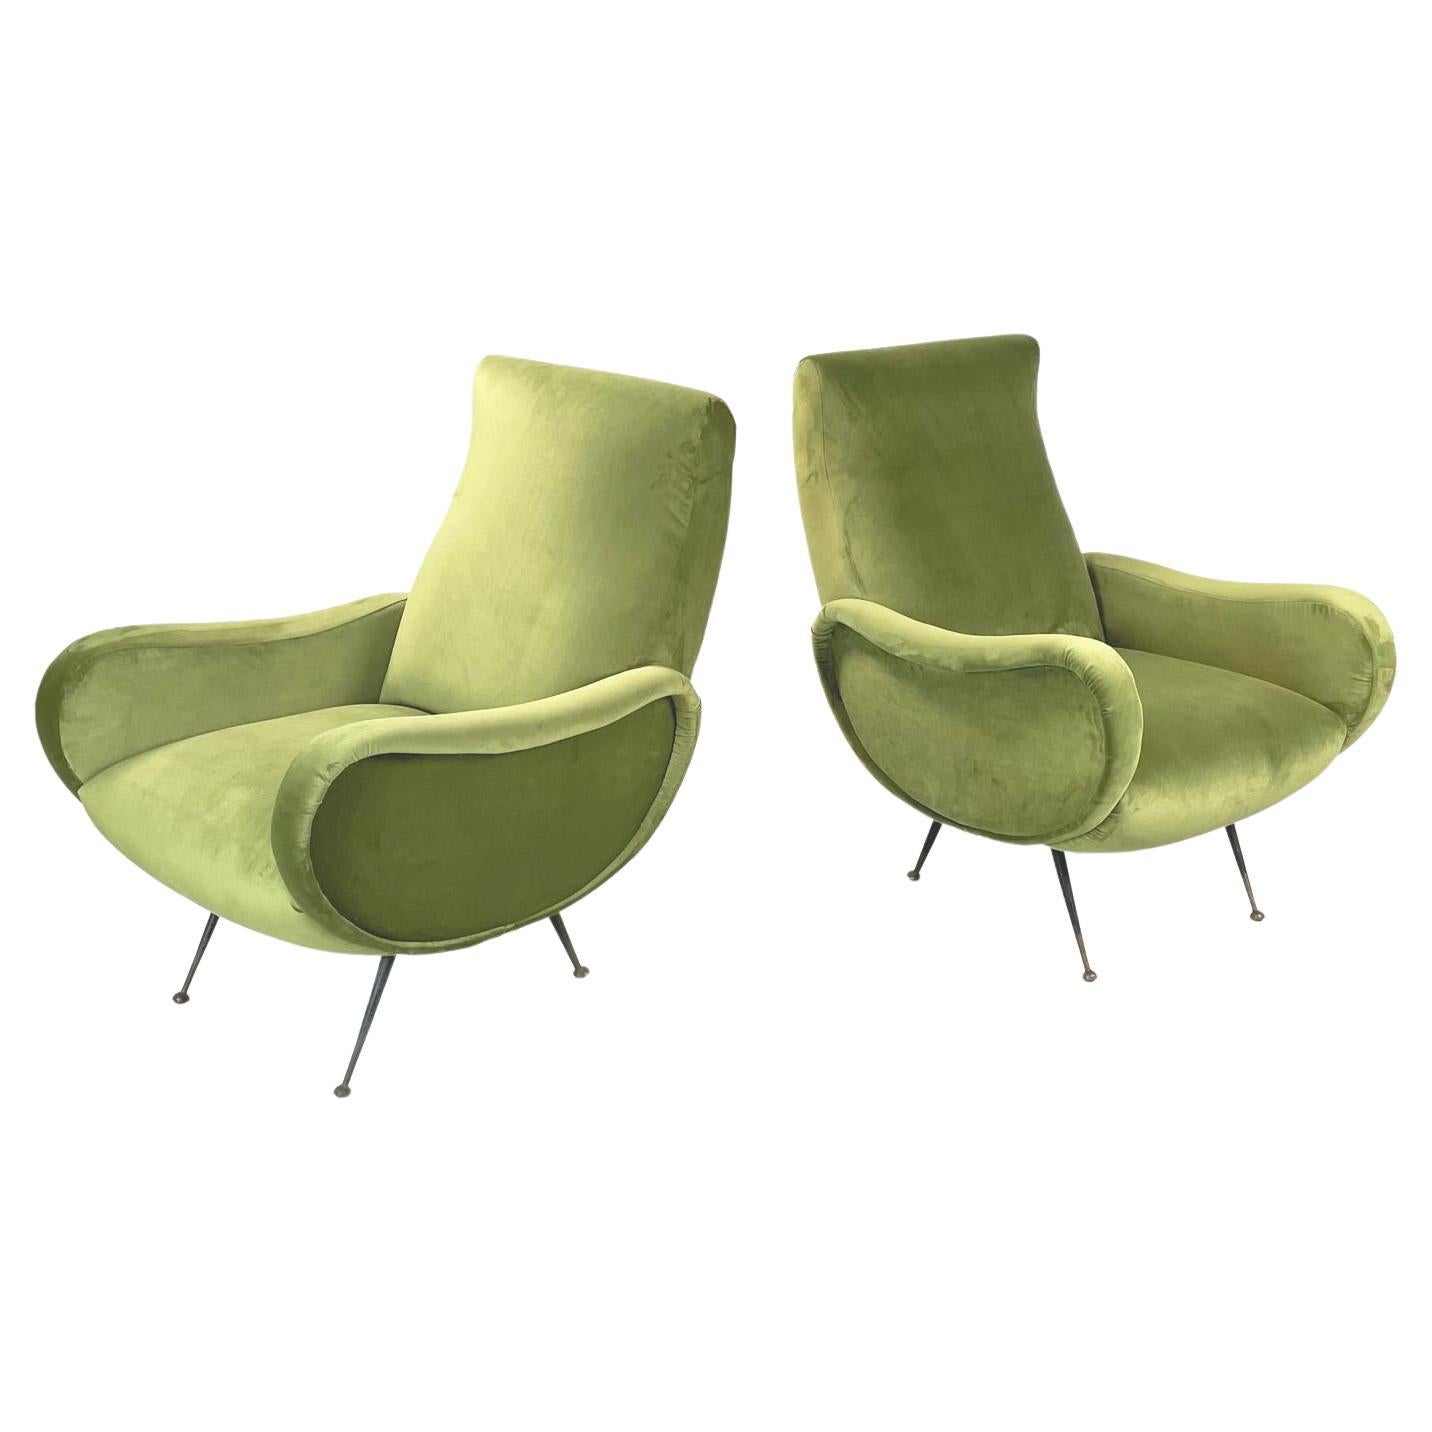 Italian Midcentury Green Velvet and Black Metal Armchairs in Lady Style, 1950s